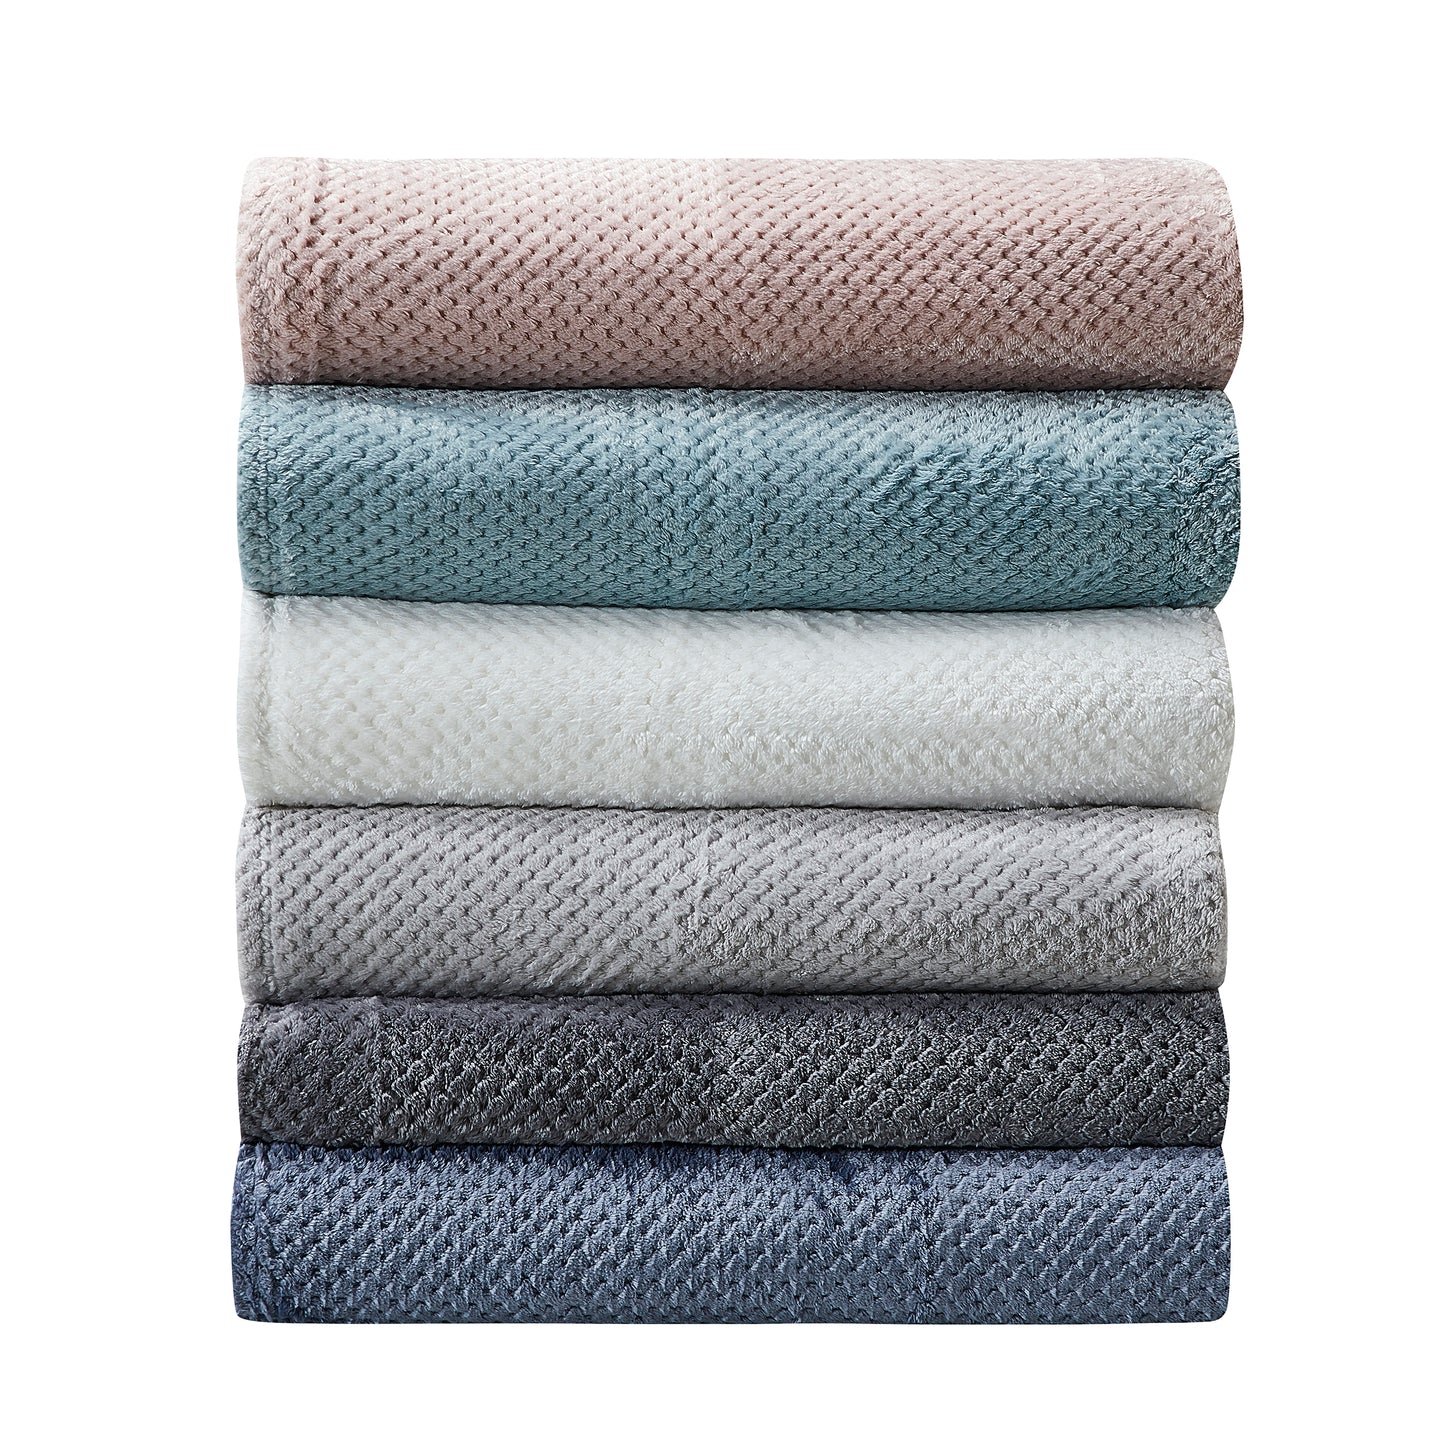 350 Series Classic Textured Blanket - Mineral